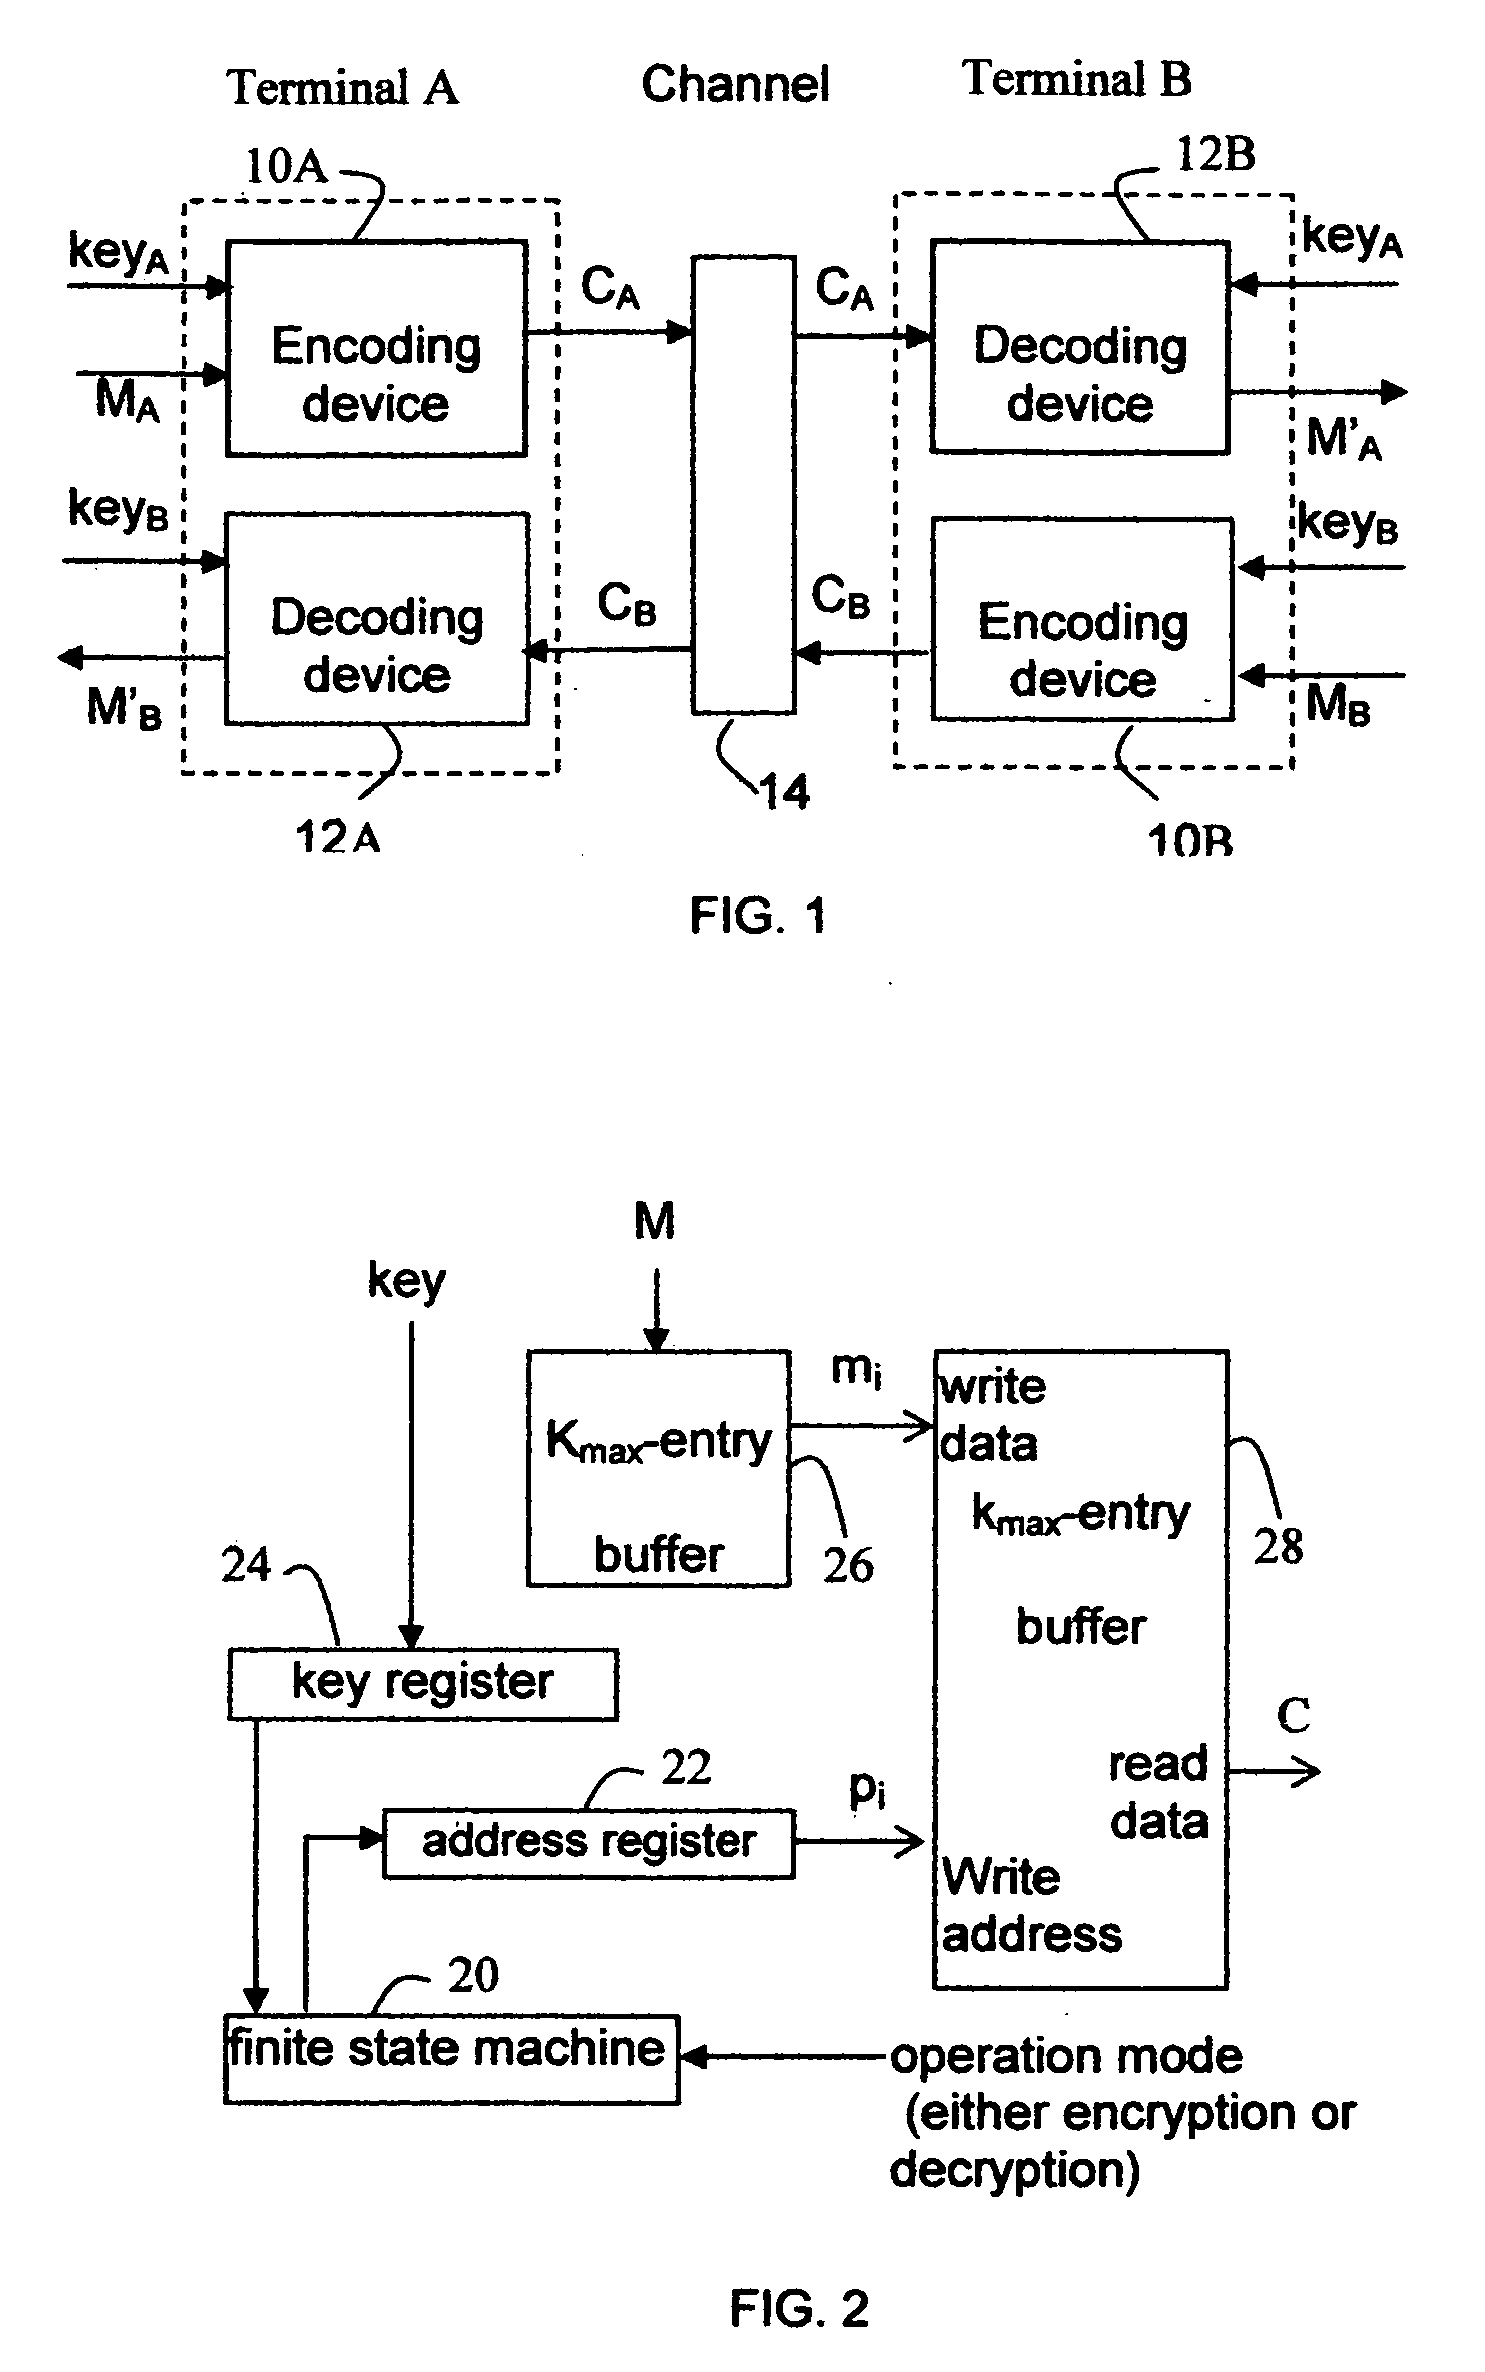 System and method for cryptographic communications using permutation